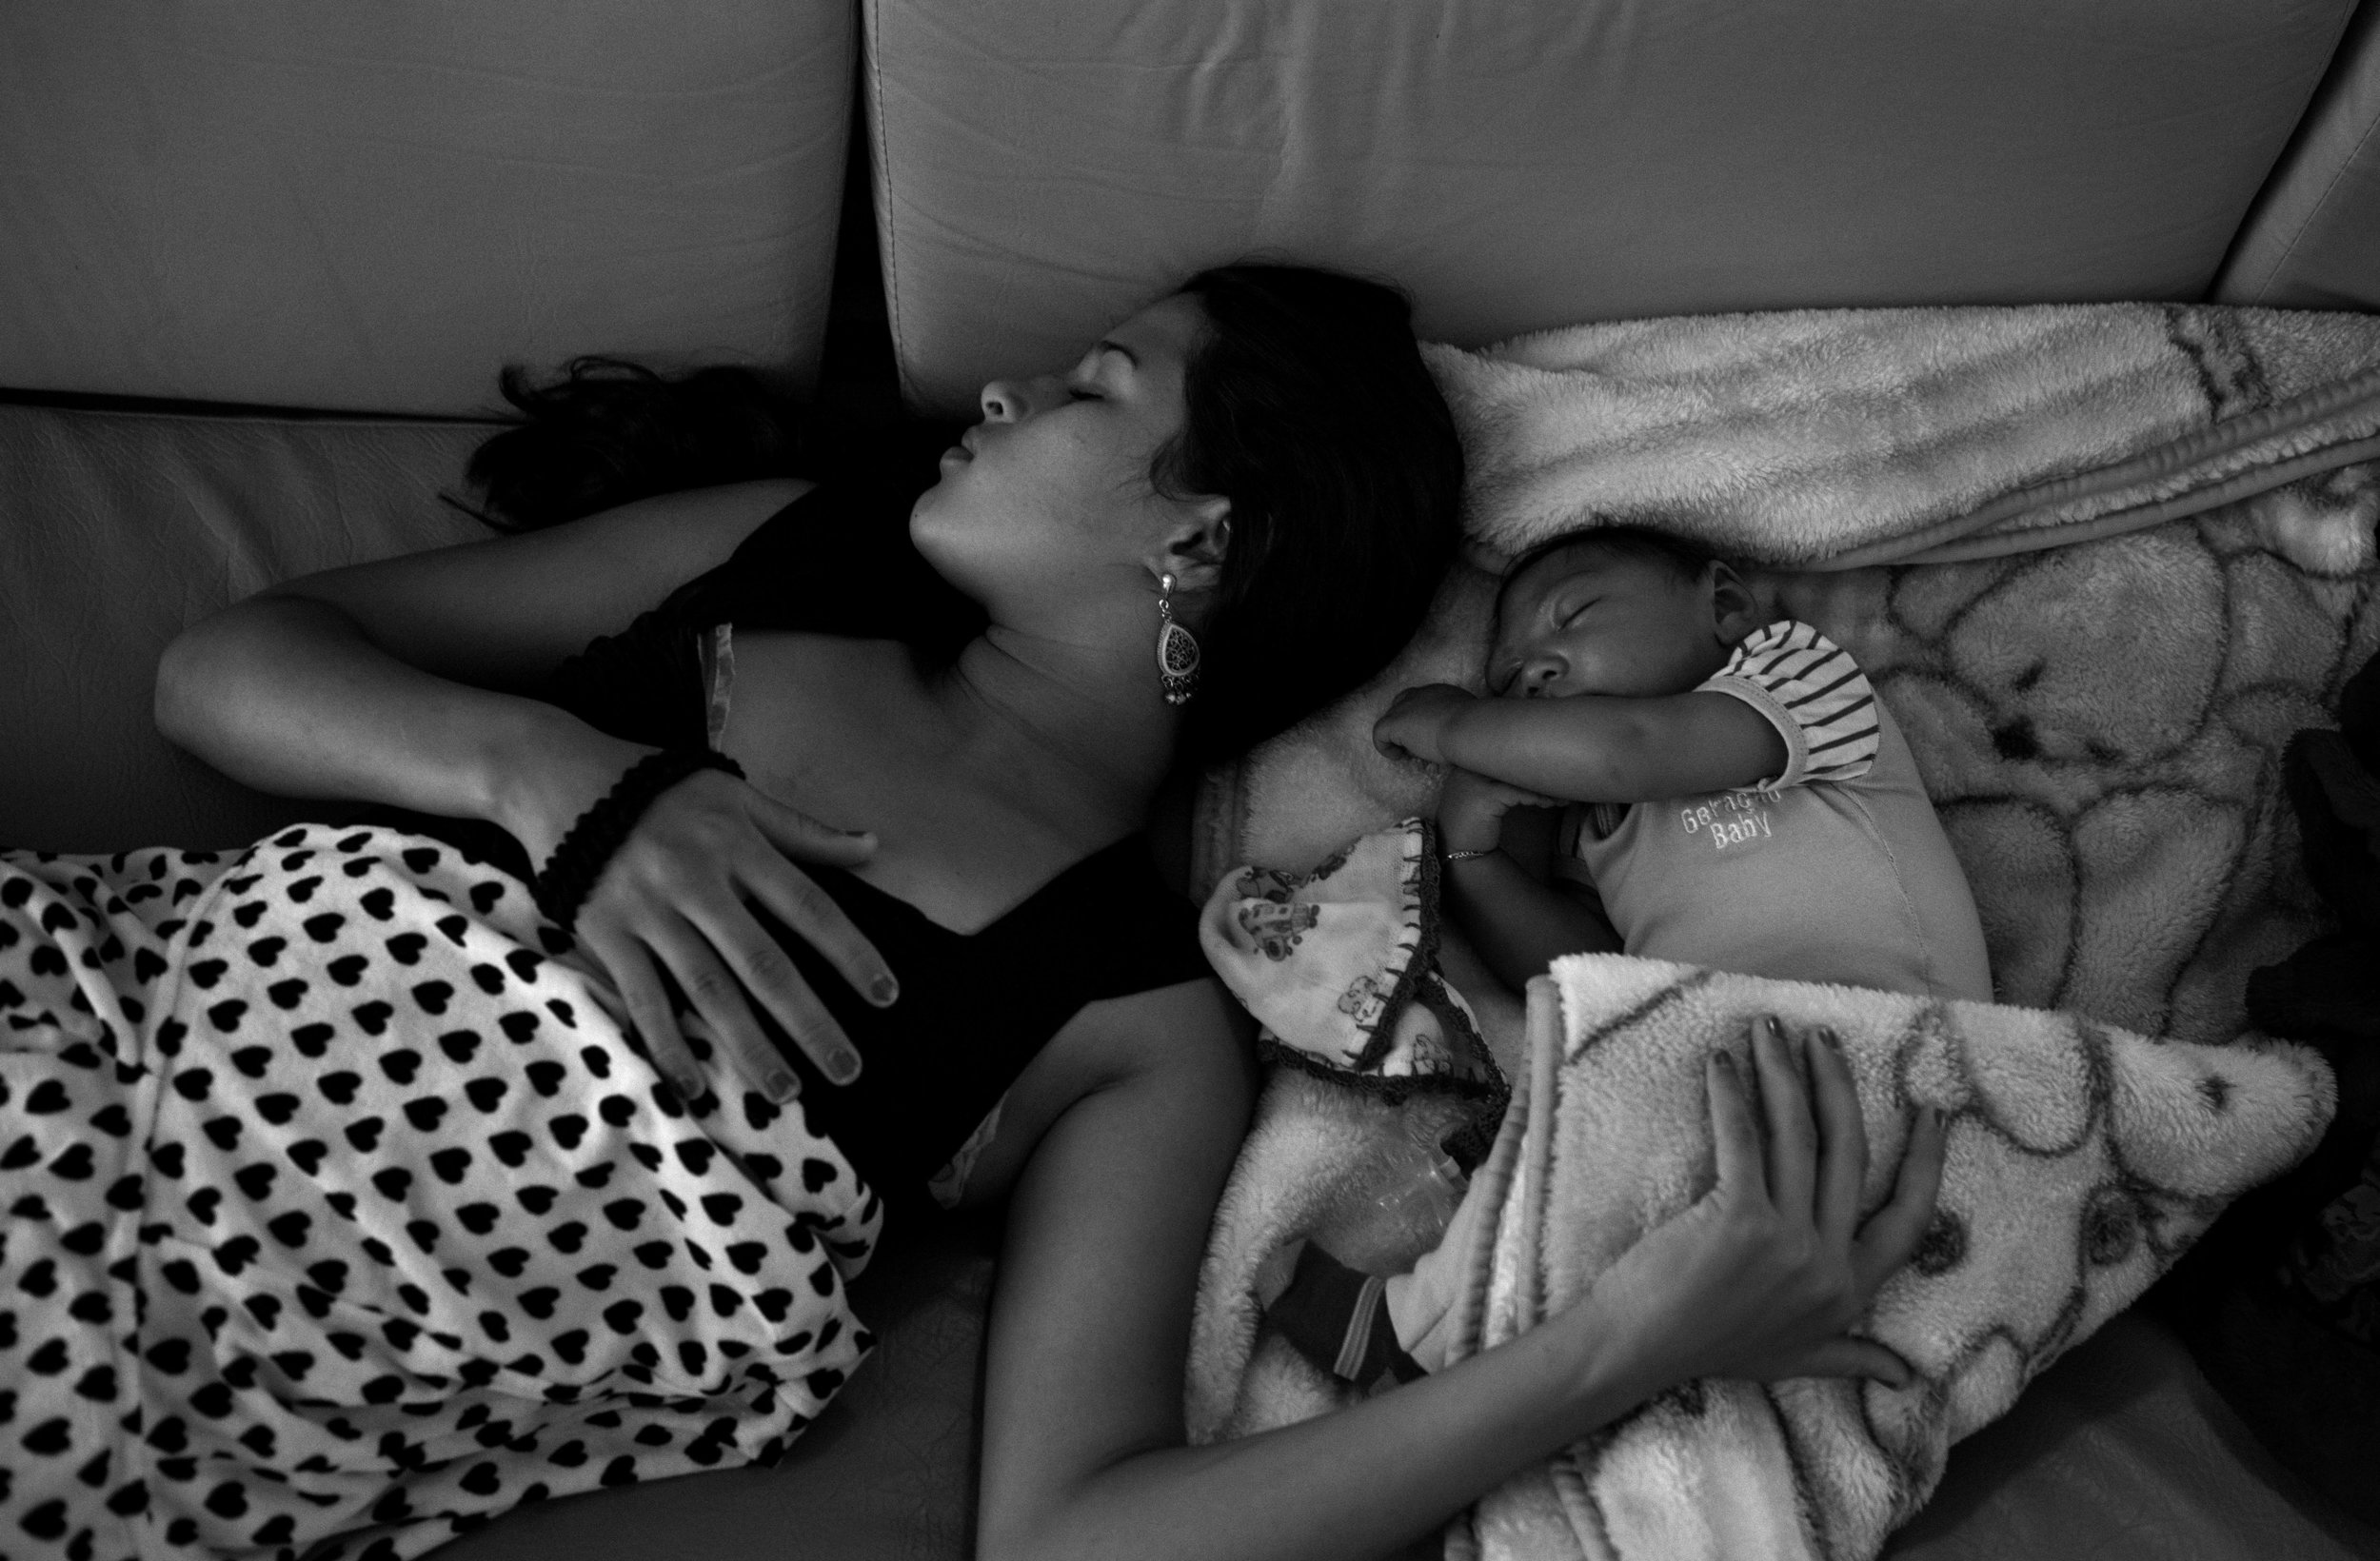  Kalissandra de Olivera, age 17, naps next to her son in a hallway of Pedro 1 Municipal Hospital. Between medical exams, physiotherapy appointments, and support group meetings, parents of babies with microcephaly spend long hours — for several days e